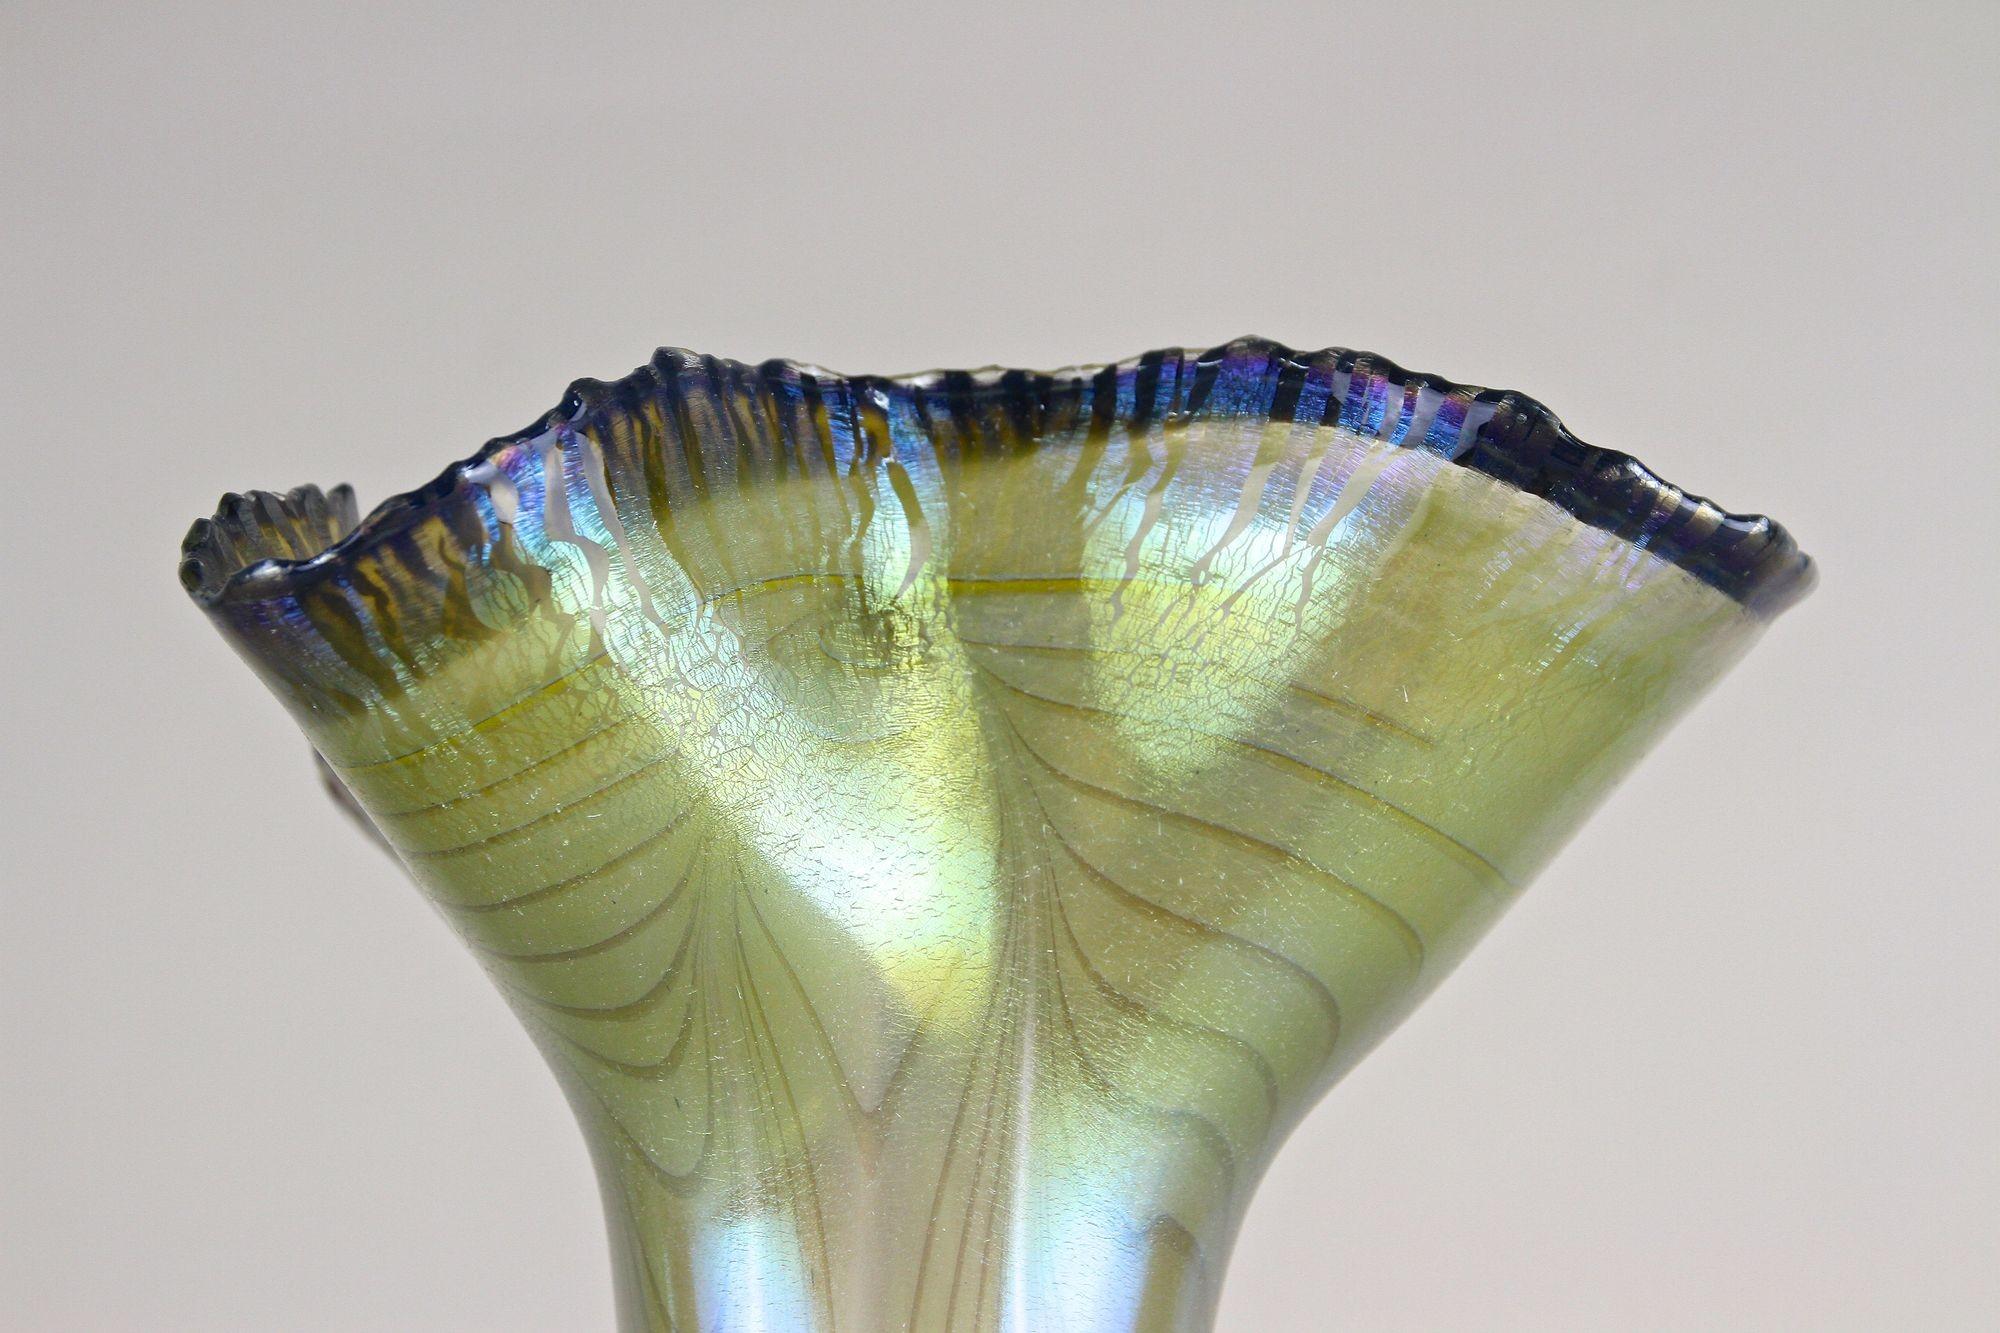 Mid-Century Modern 20th Century Iridescent Glass Vase by E. Eisch - Signed, Germany 1982 For Sale